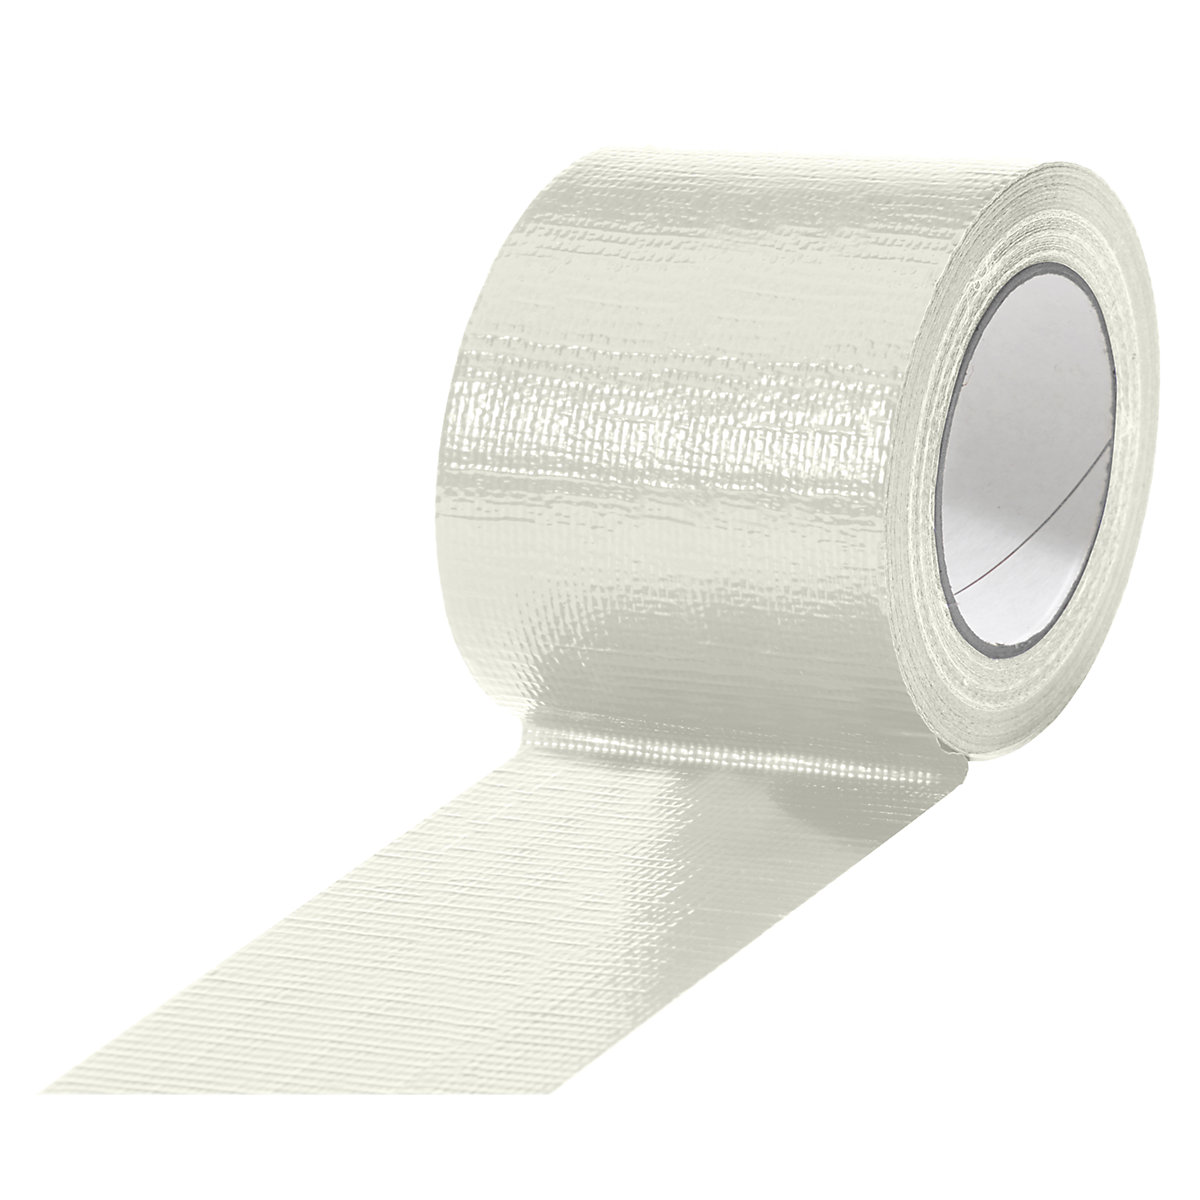 Fabric tape, in different colours, pack of 12 rolls, white, tape width 75 mm-6